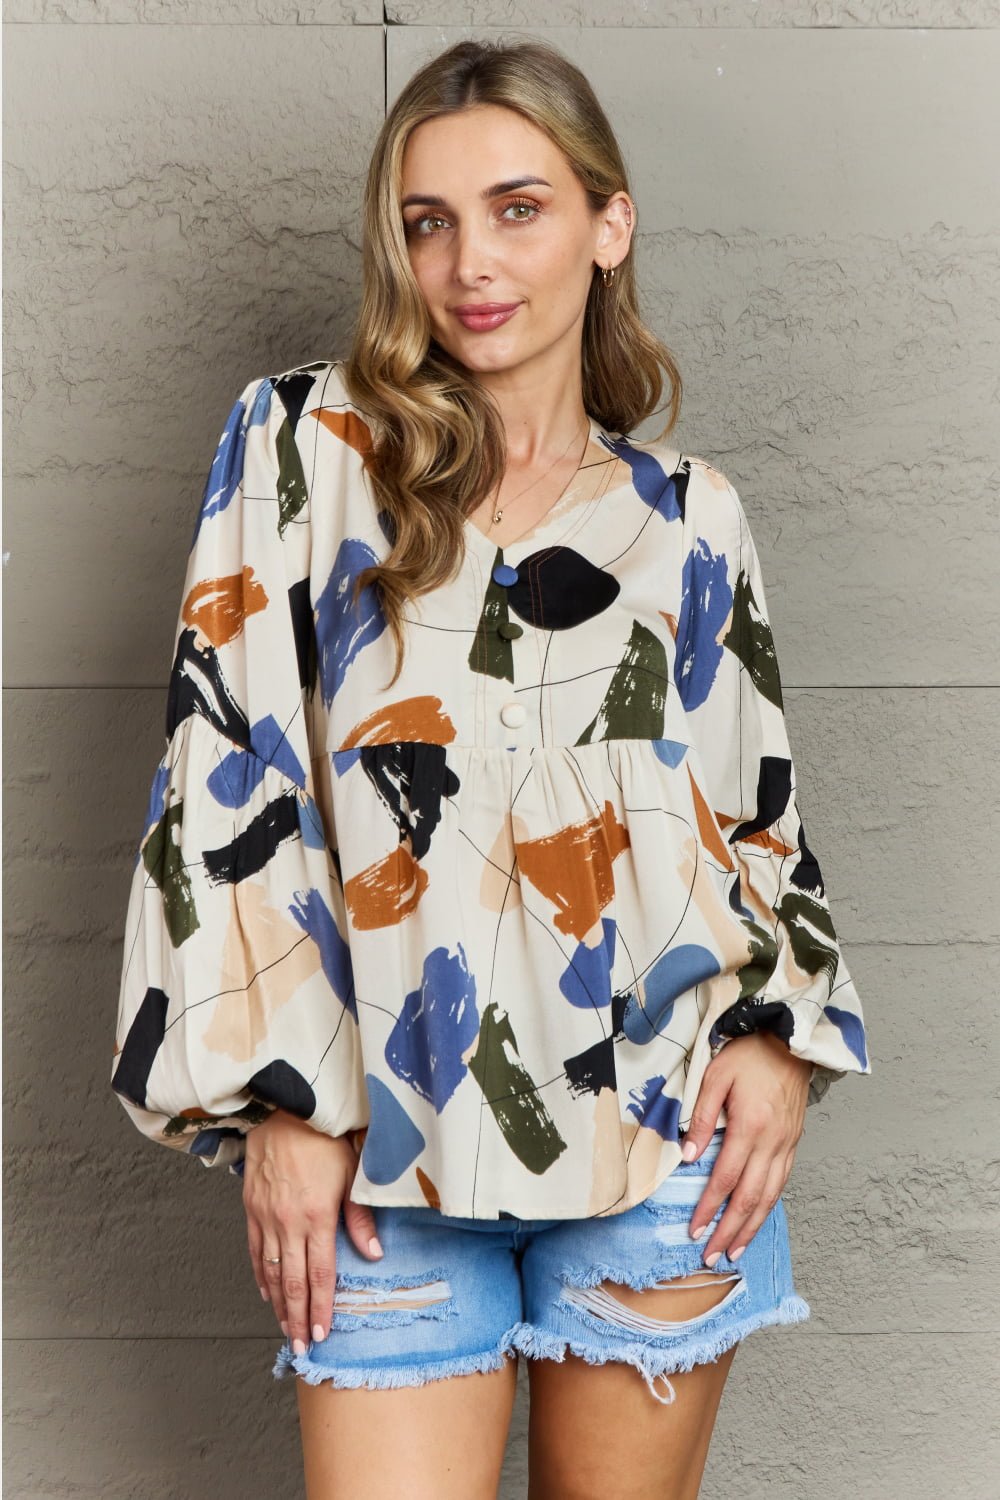 Hailey & Co Wishful Thinking Multi Colored Printed Blouse - seldenkingsley